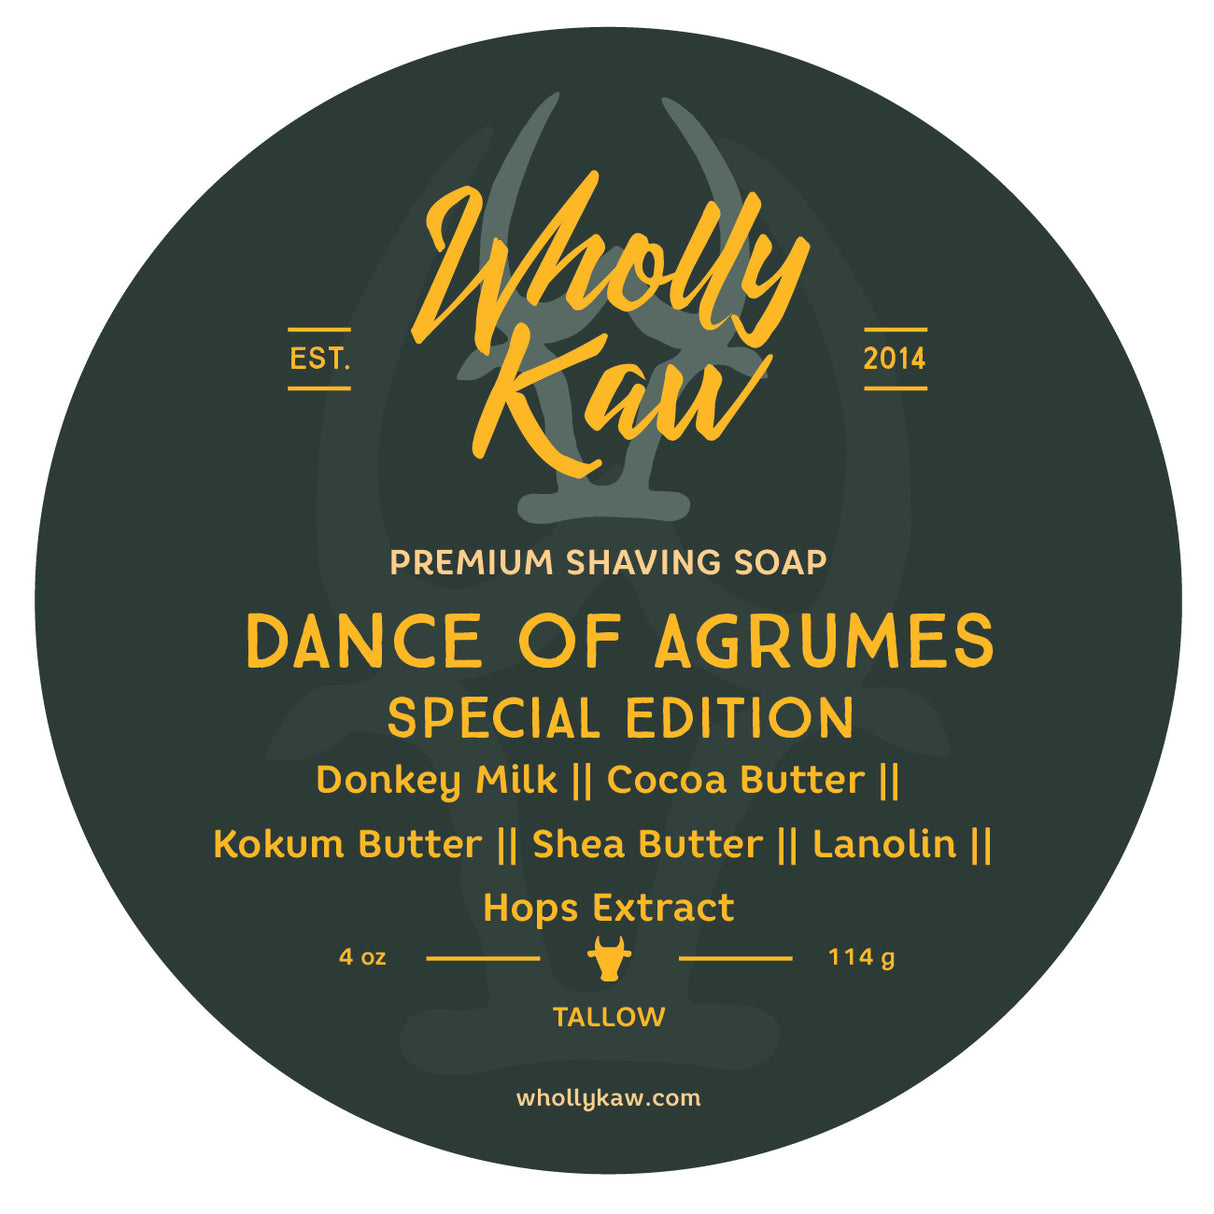 Wholly Kaw - Dance of Agrumes - Special Edition Shave Soap